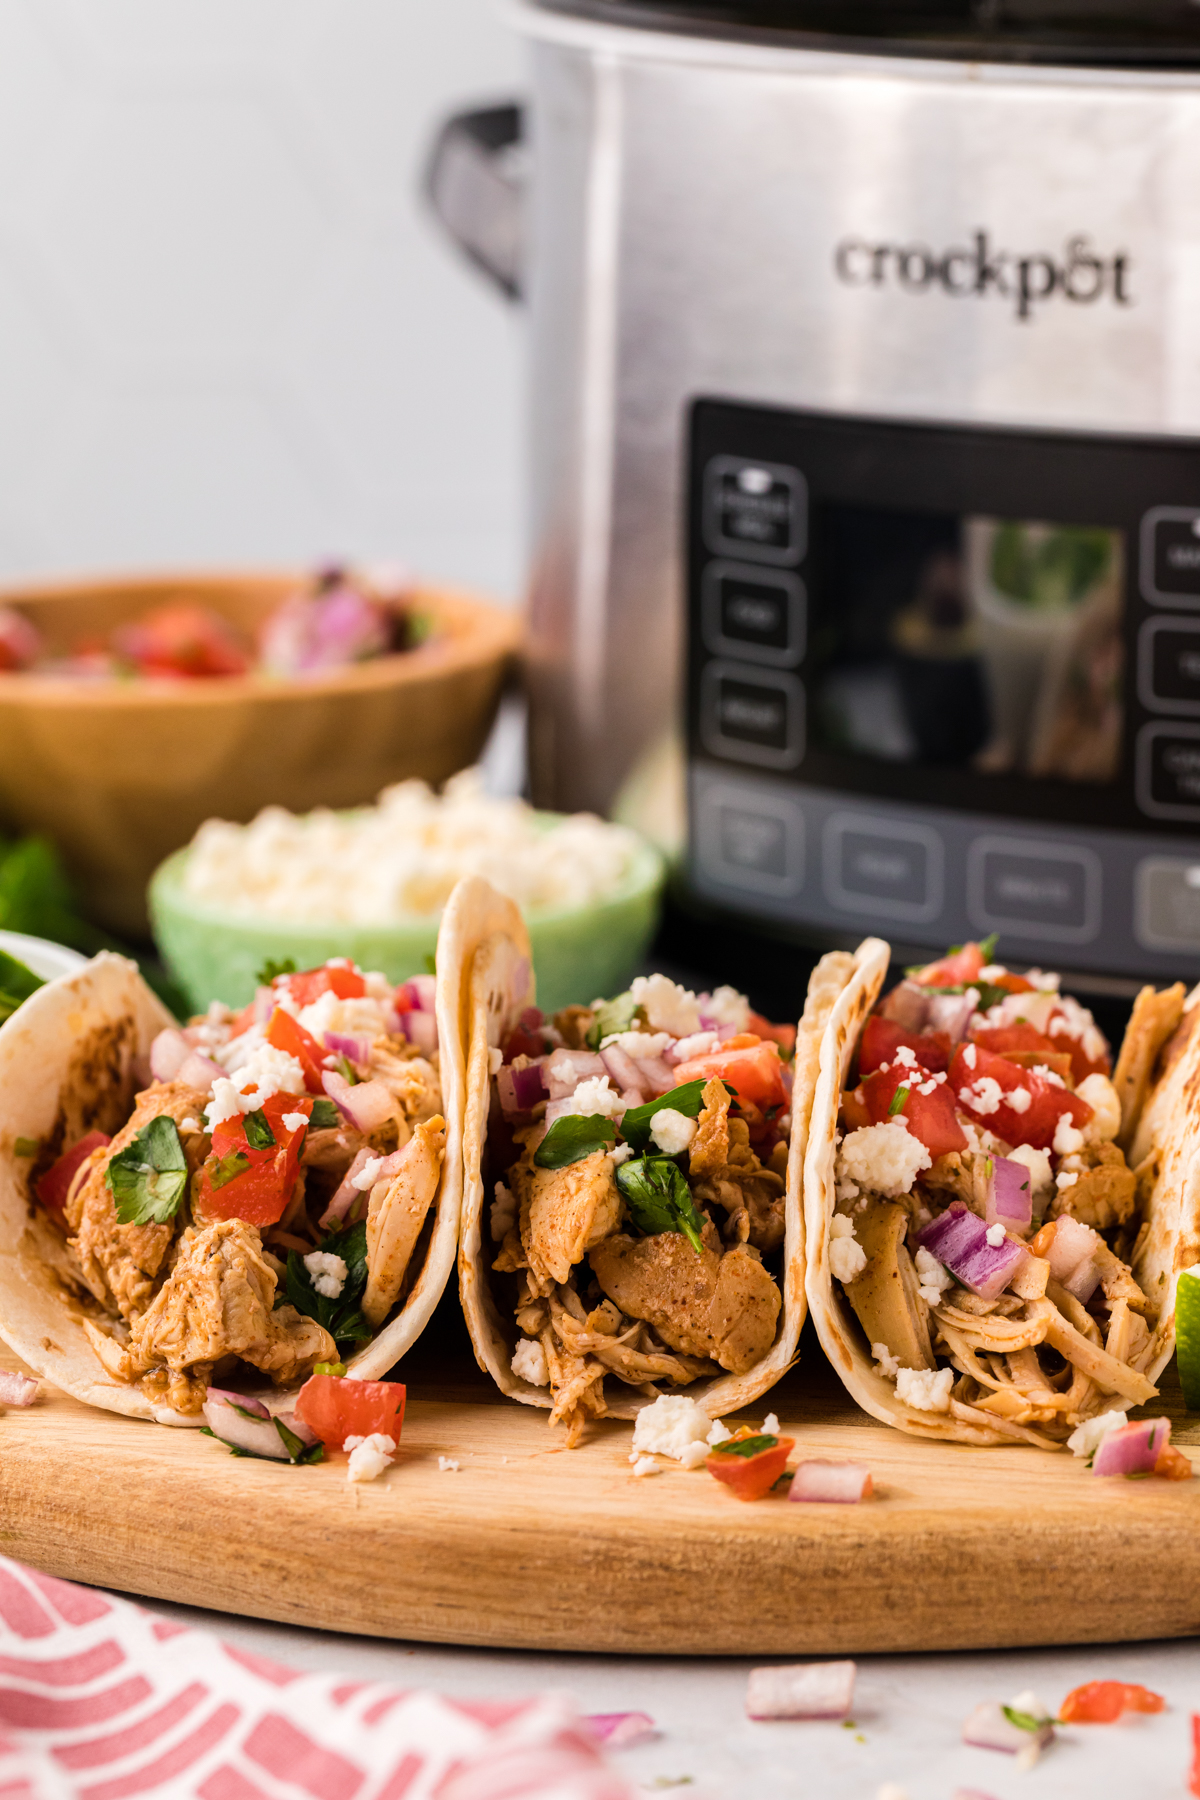 Cool ranch tacos in front of a slow cooker.